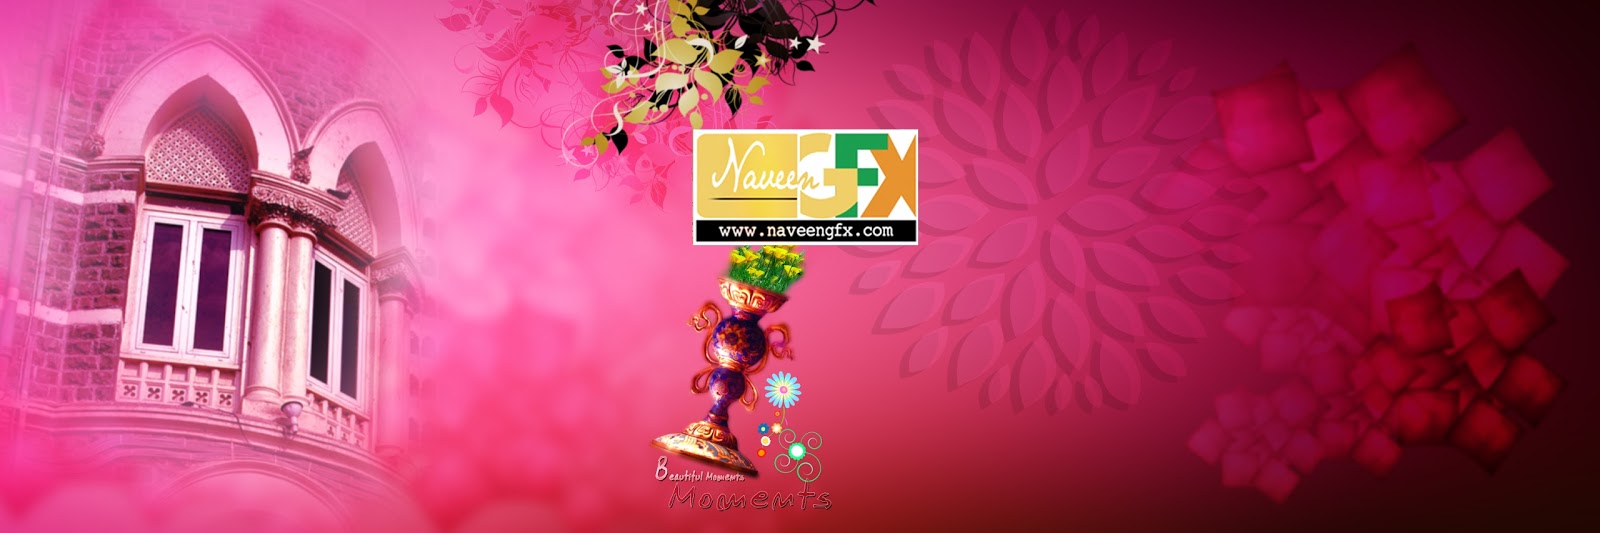 indian wedding clipart psd download - photo #35